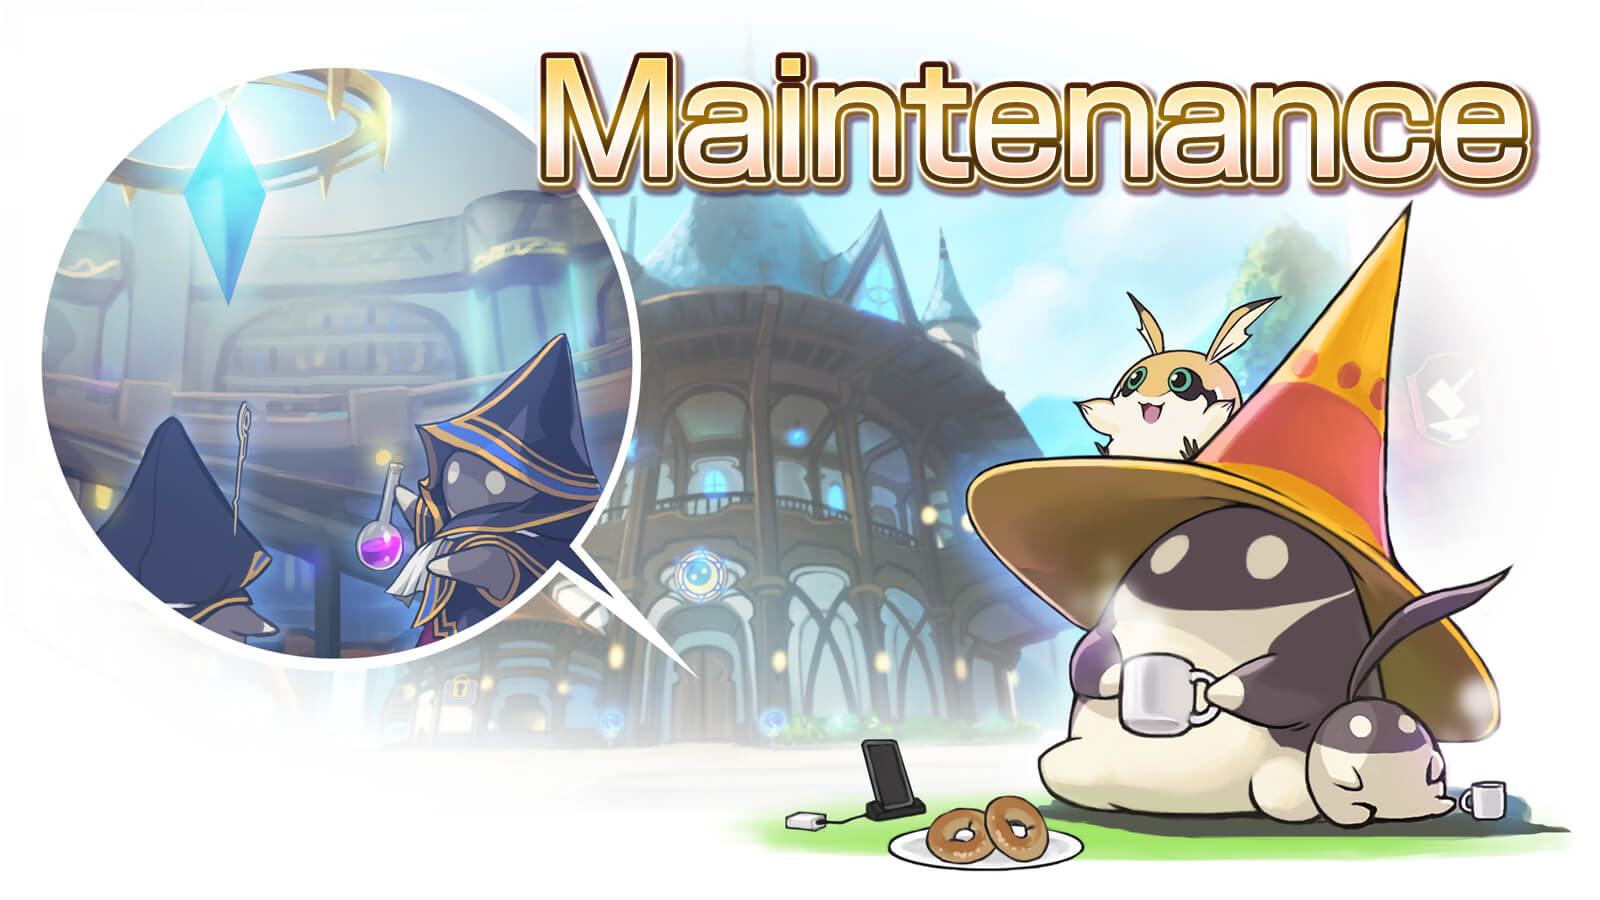 [Completed] Maintenance Notice: Feb 20, 14:00 - 18:00